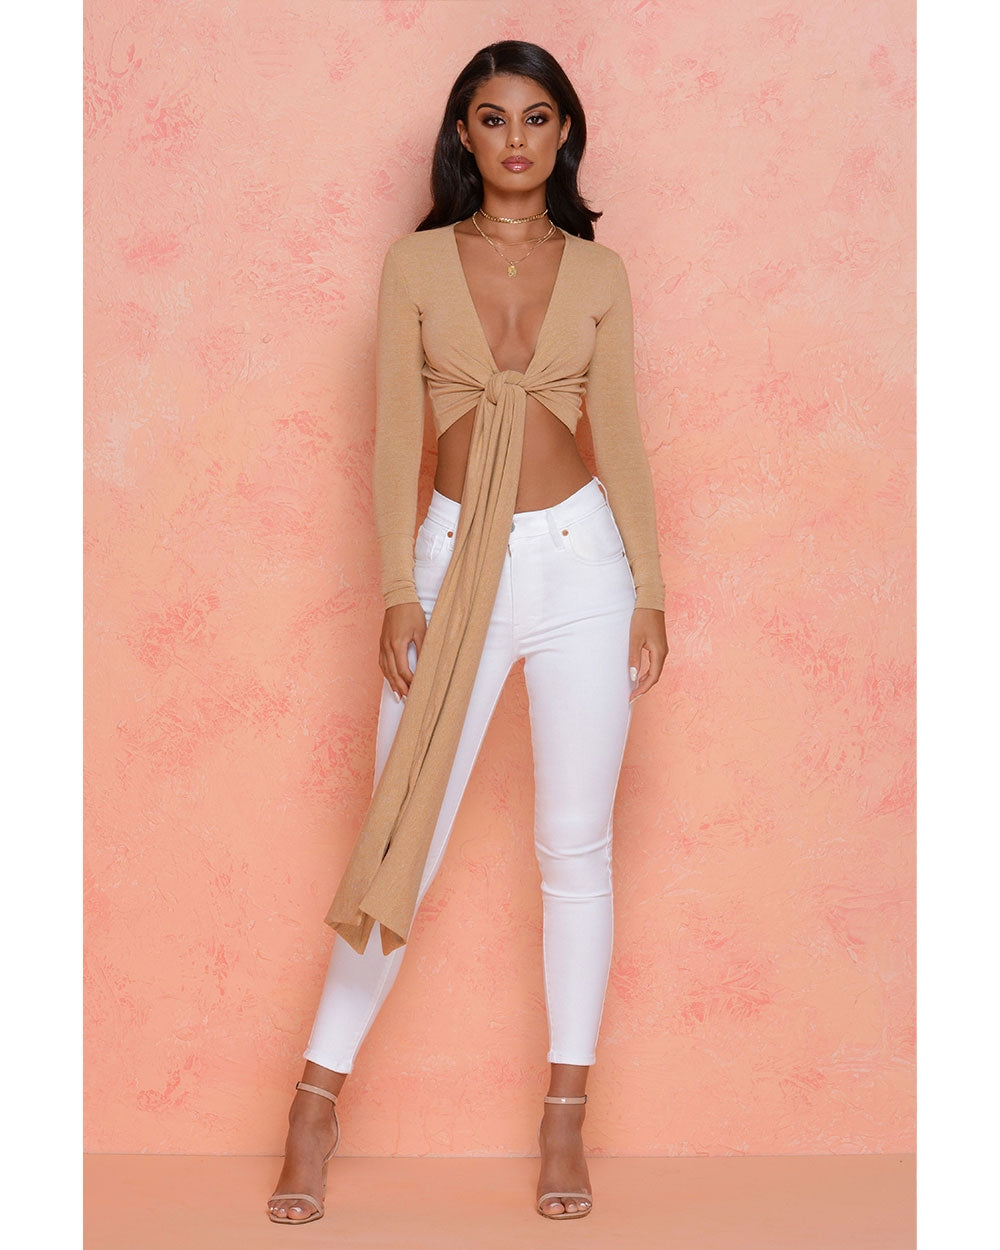 Self Centered Long Sleeve Plunge Tie Front Top in Beige